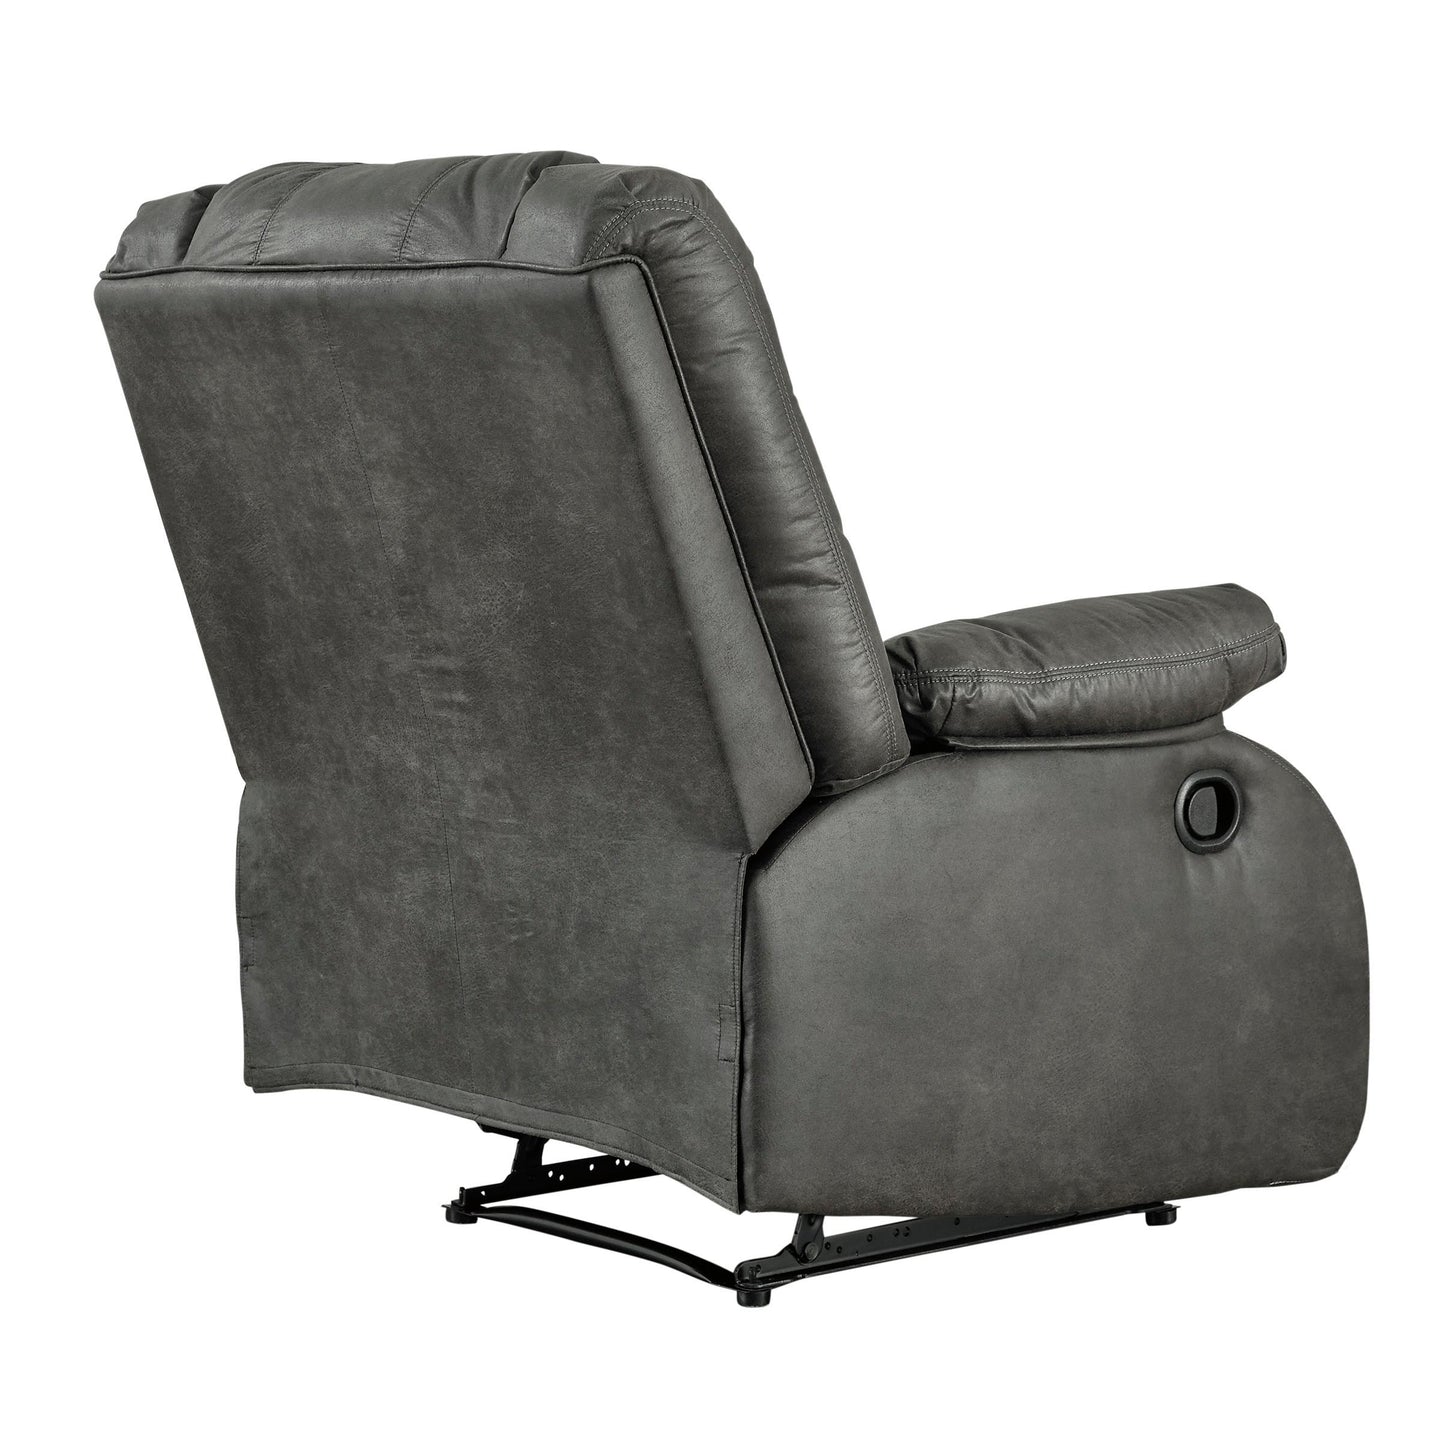 Signature Design by Ashley Bladewood Leather Look Recliner with Wall Recline 6030629 IMAGE 5